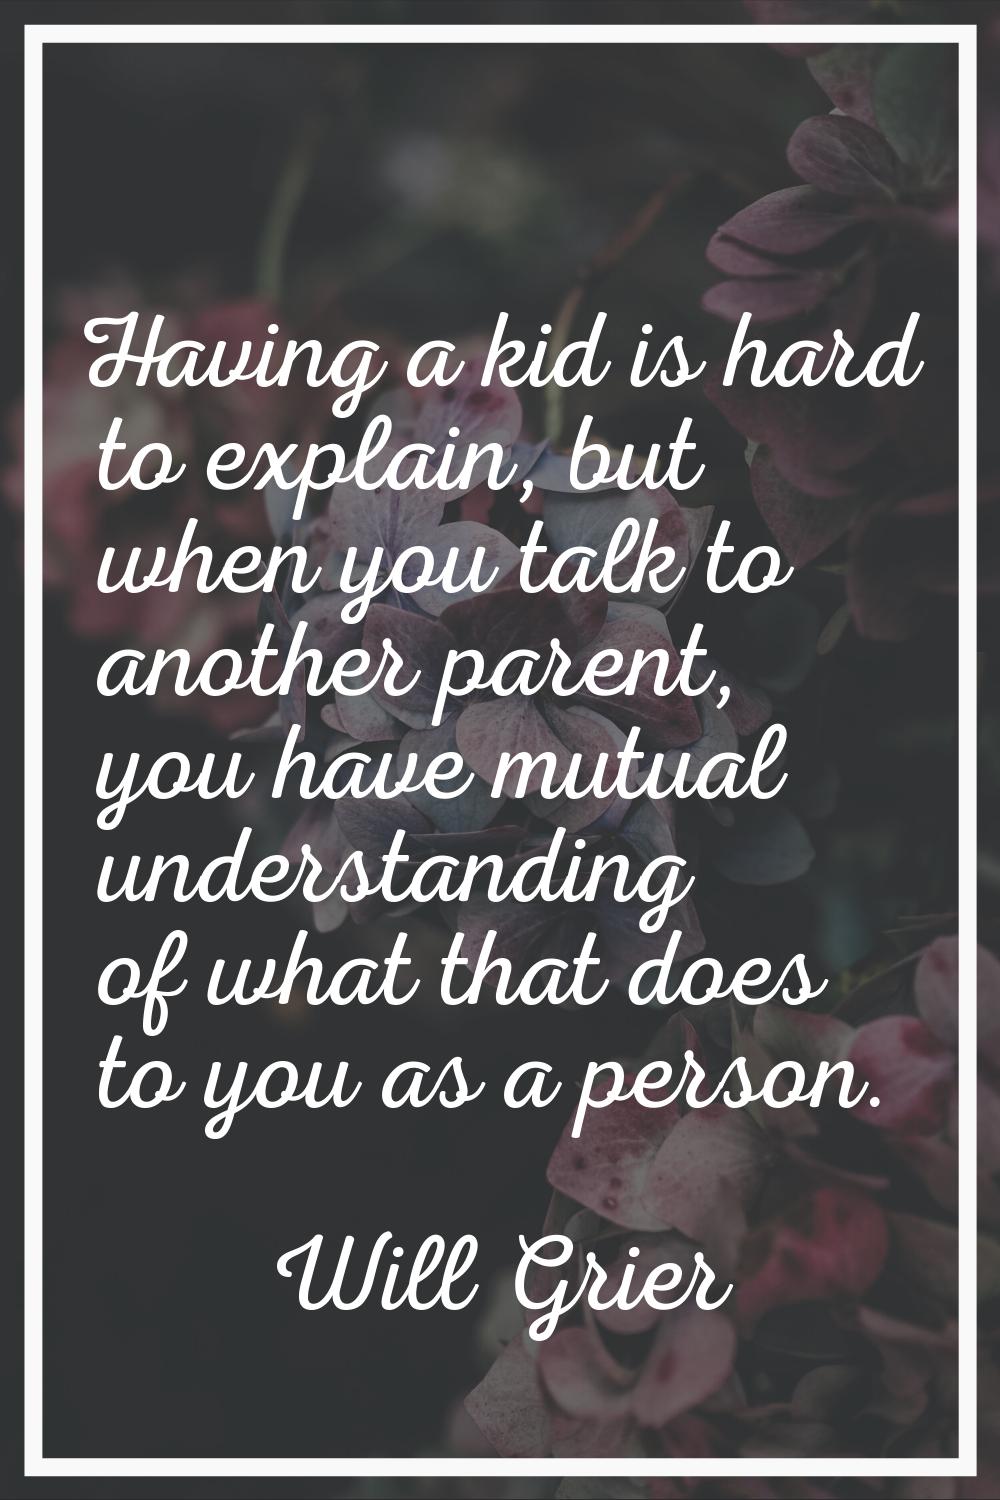 Having a kid is hard to explain, but when you talk to another parent, you have mutual understanding